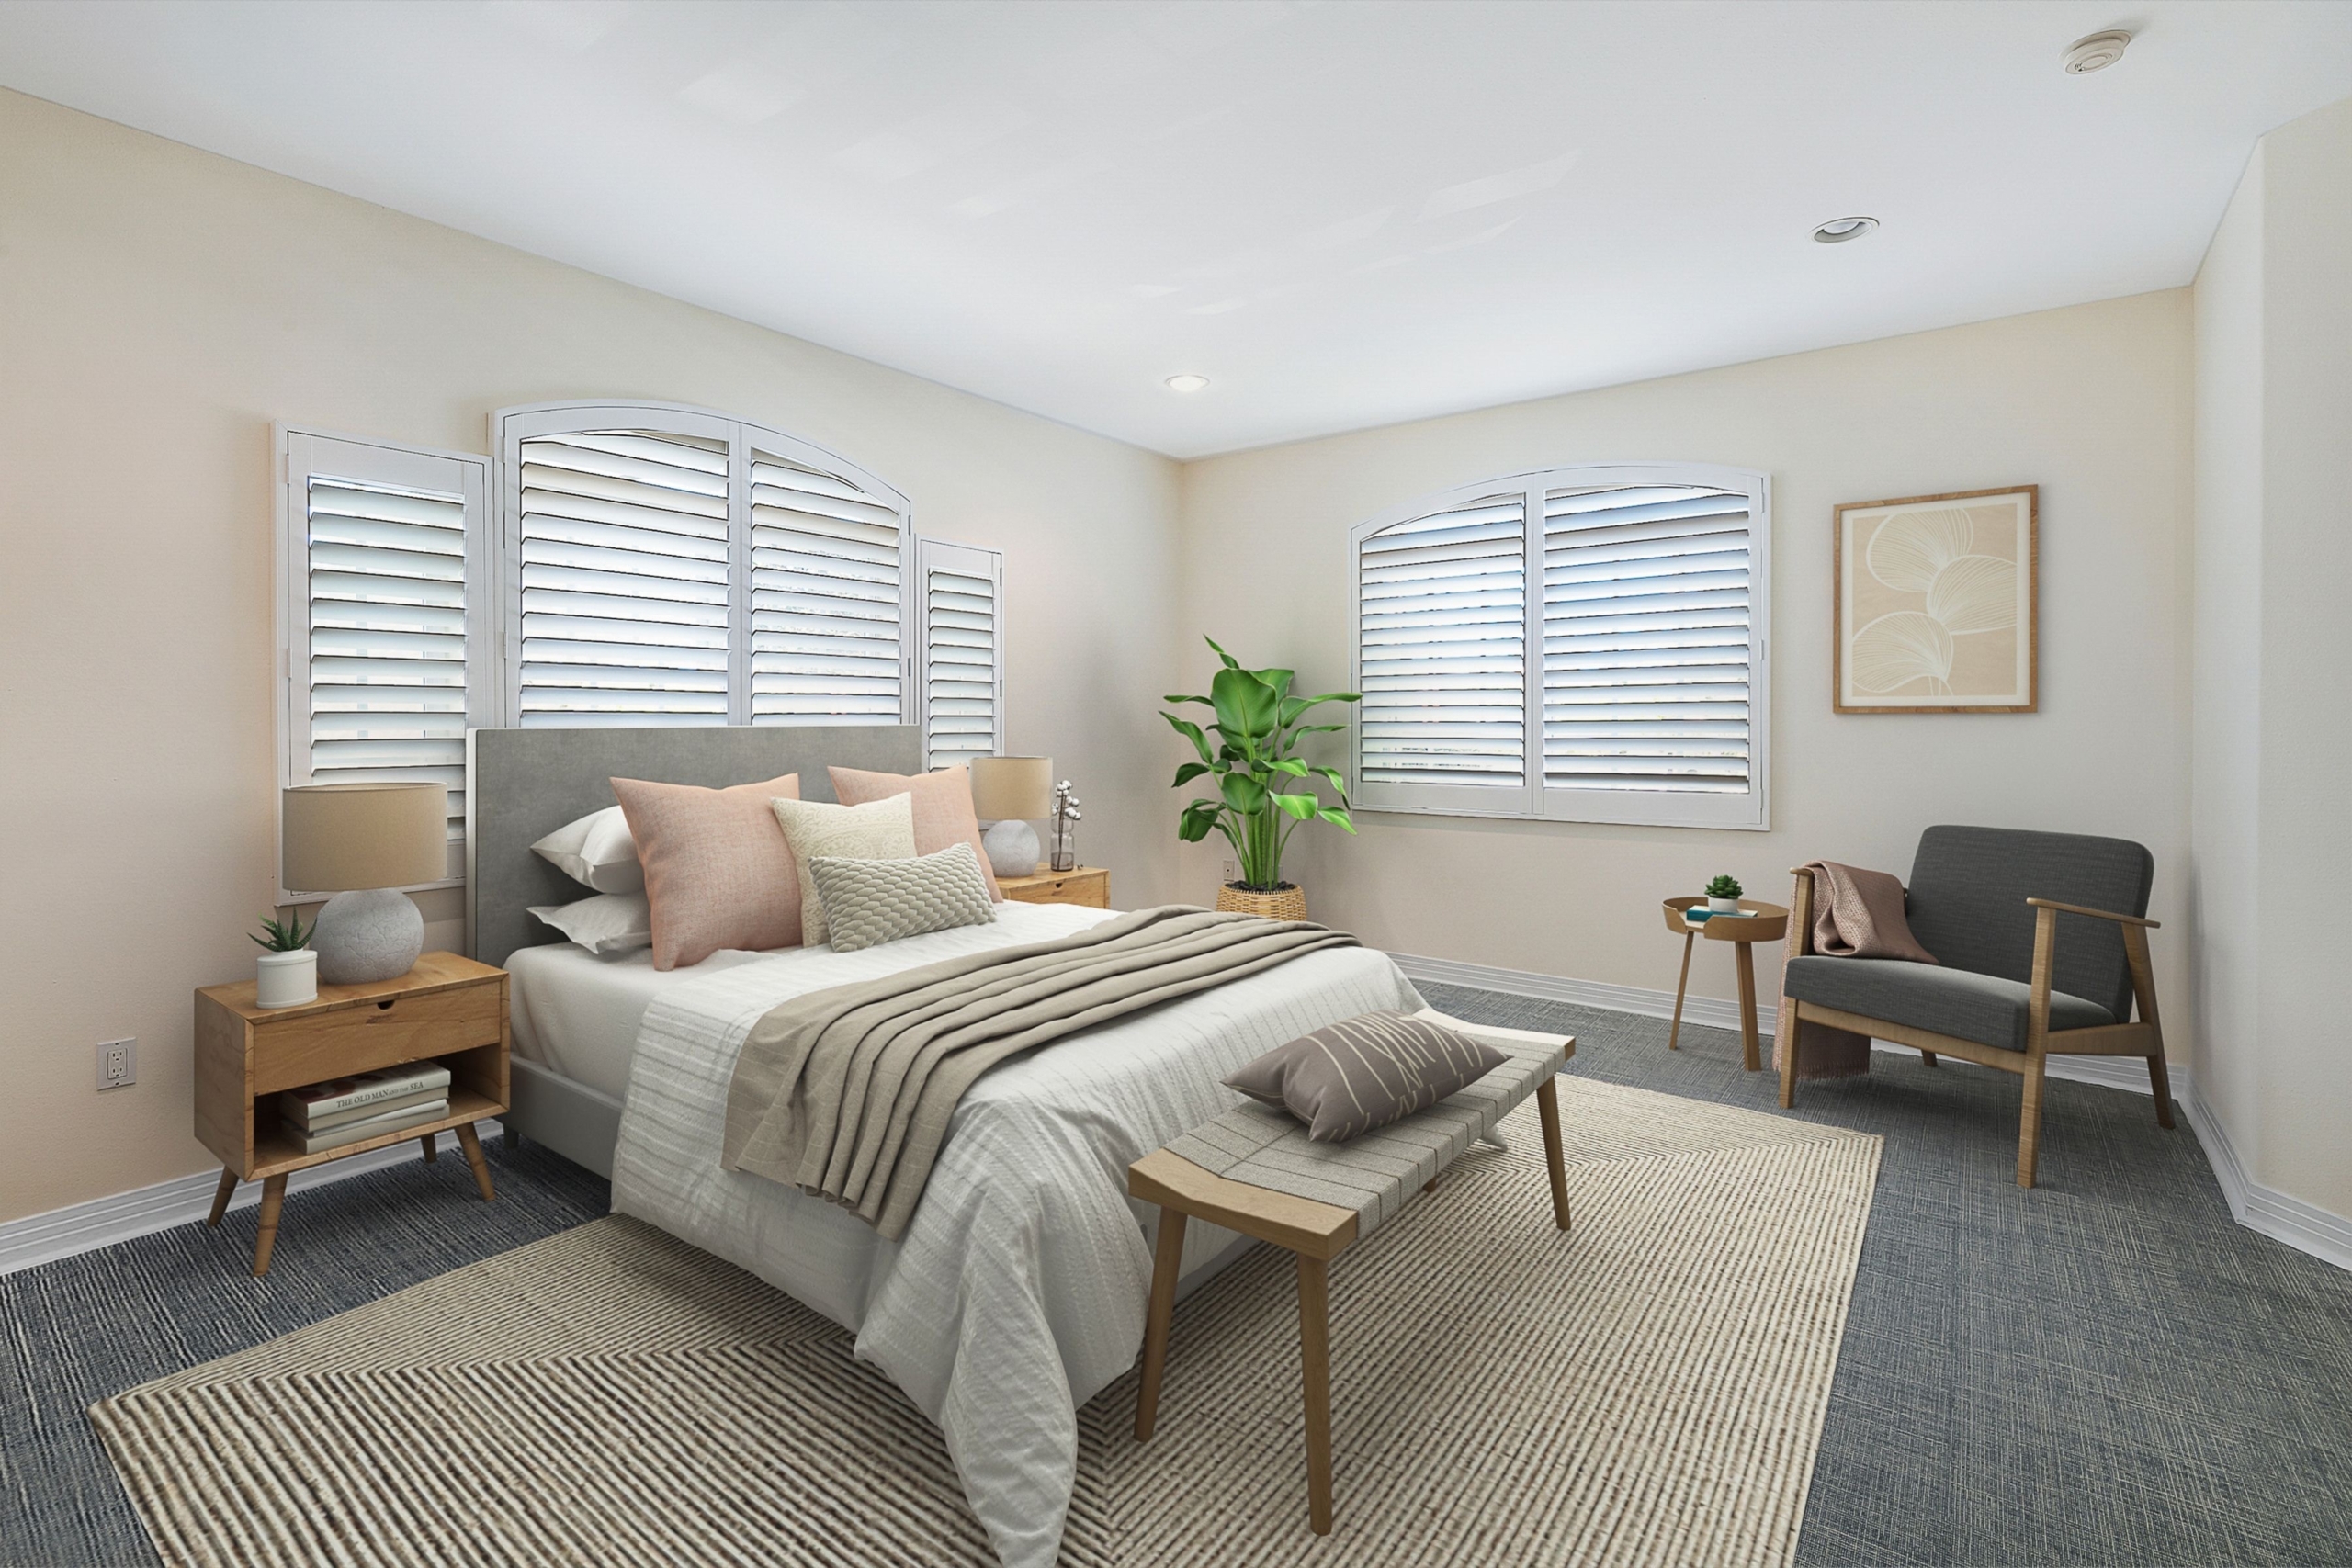 Cream bedroom with grey carpet and blinds over windows